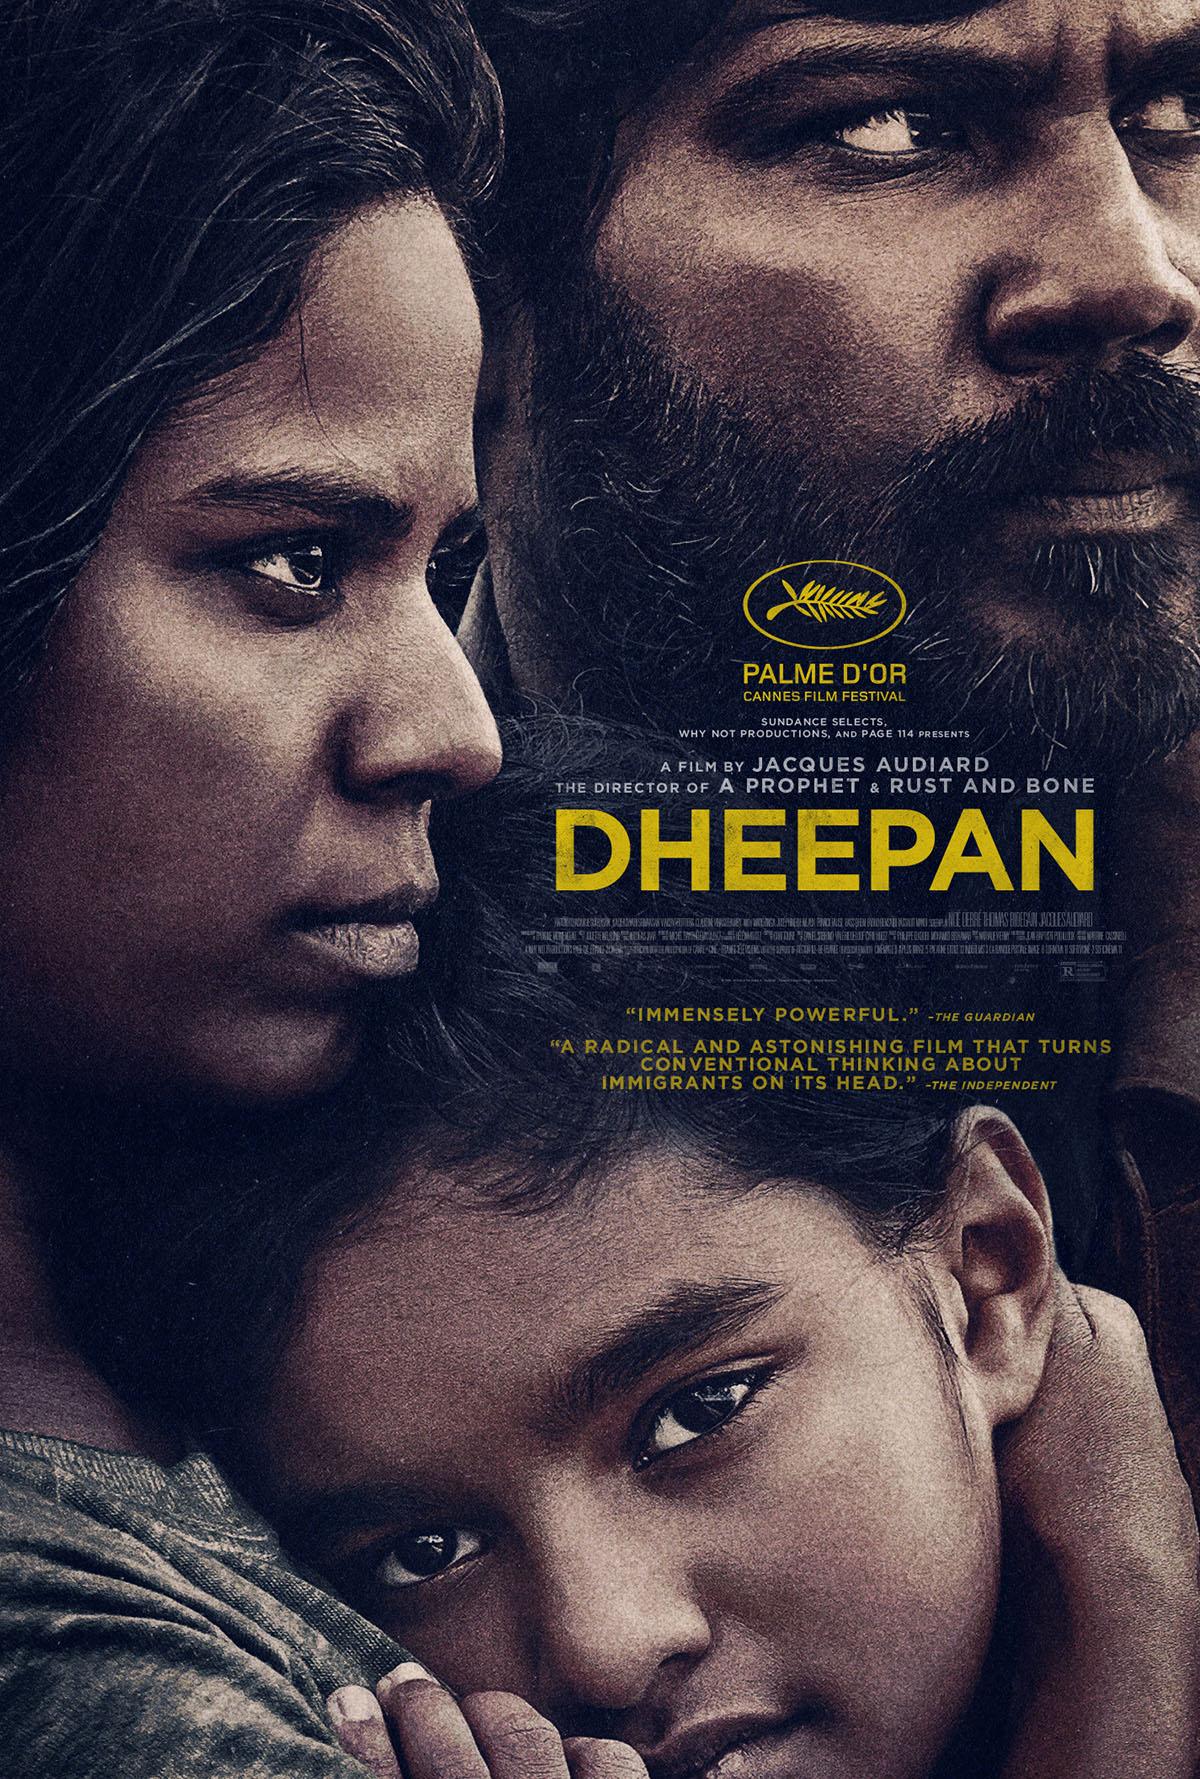 Image of the movie poster. The side face profile of man woman and a child being held close to the mother's chest.